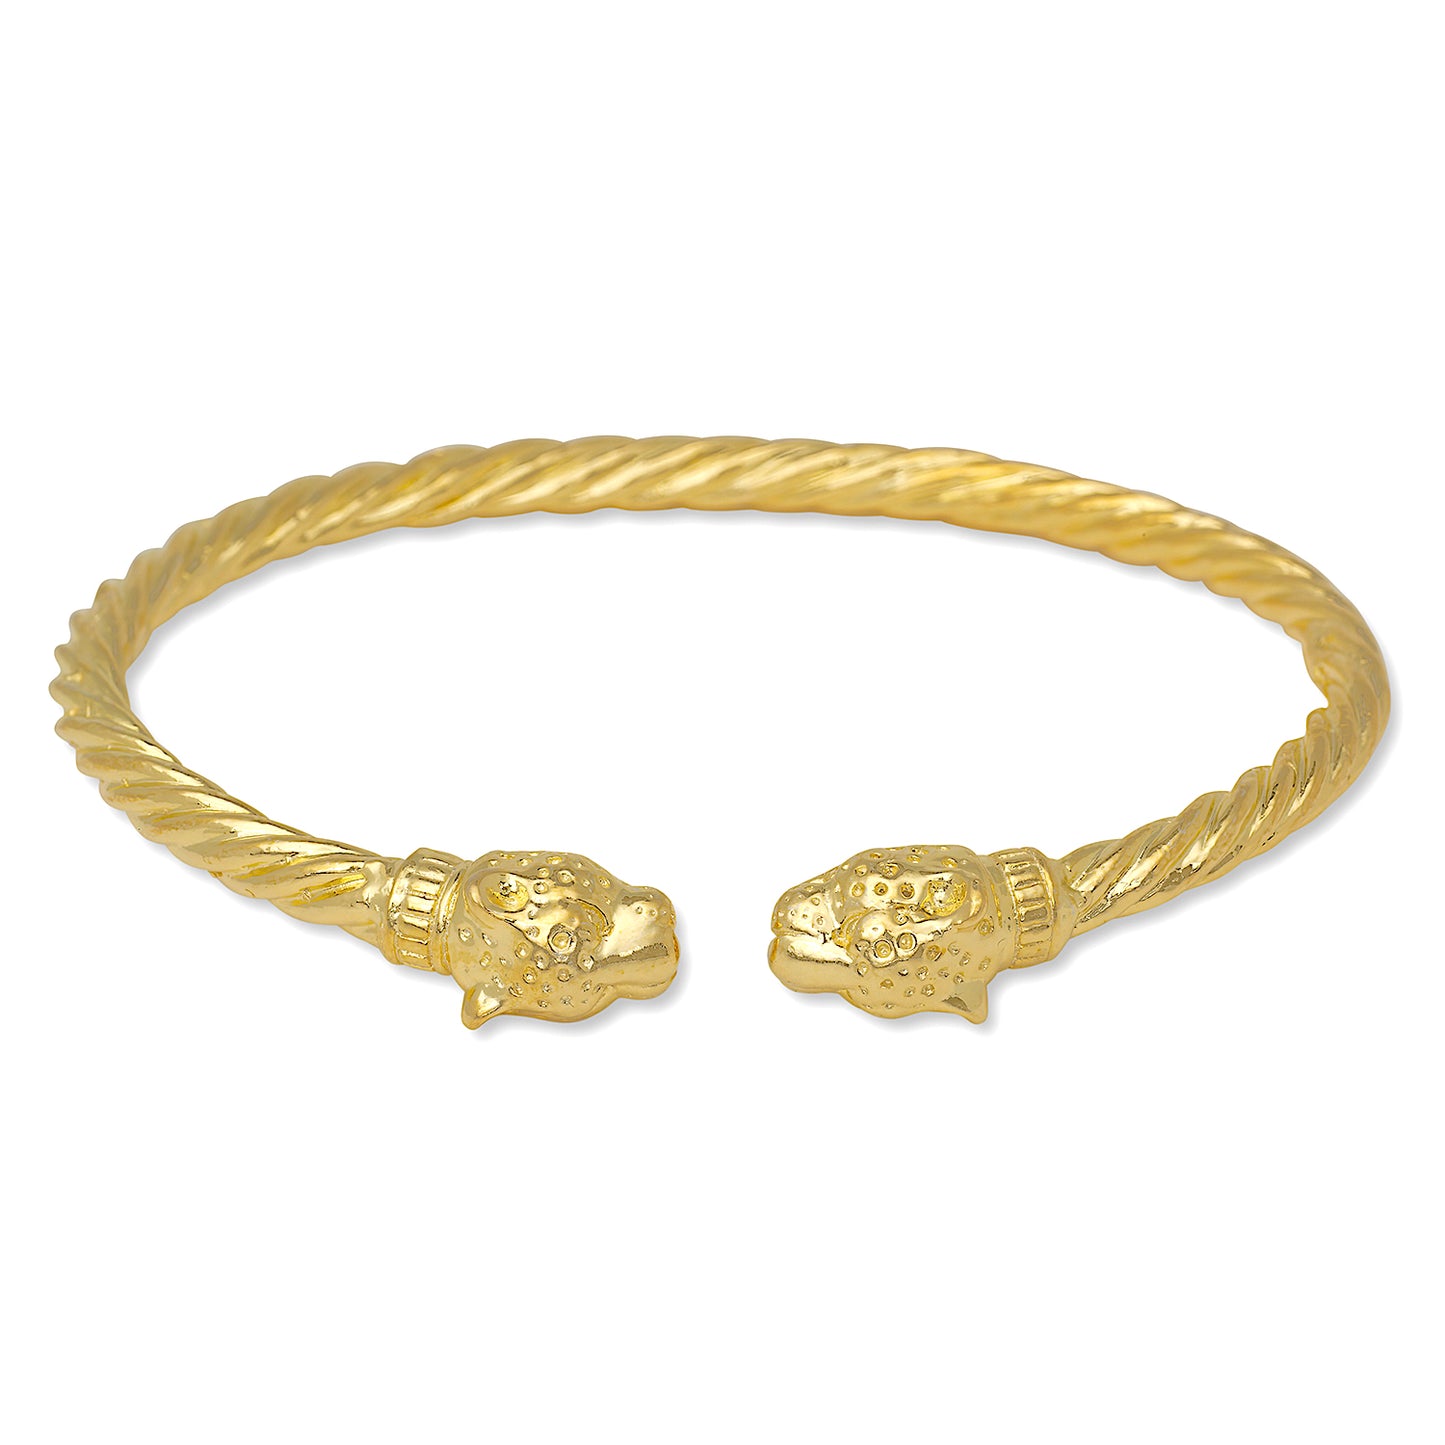 Better Jewelry Jaguar Head Coiled Rope West Indian Bangle 14K Gold .925 Sterling Silver